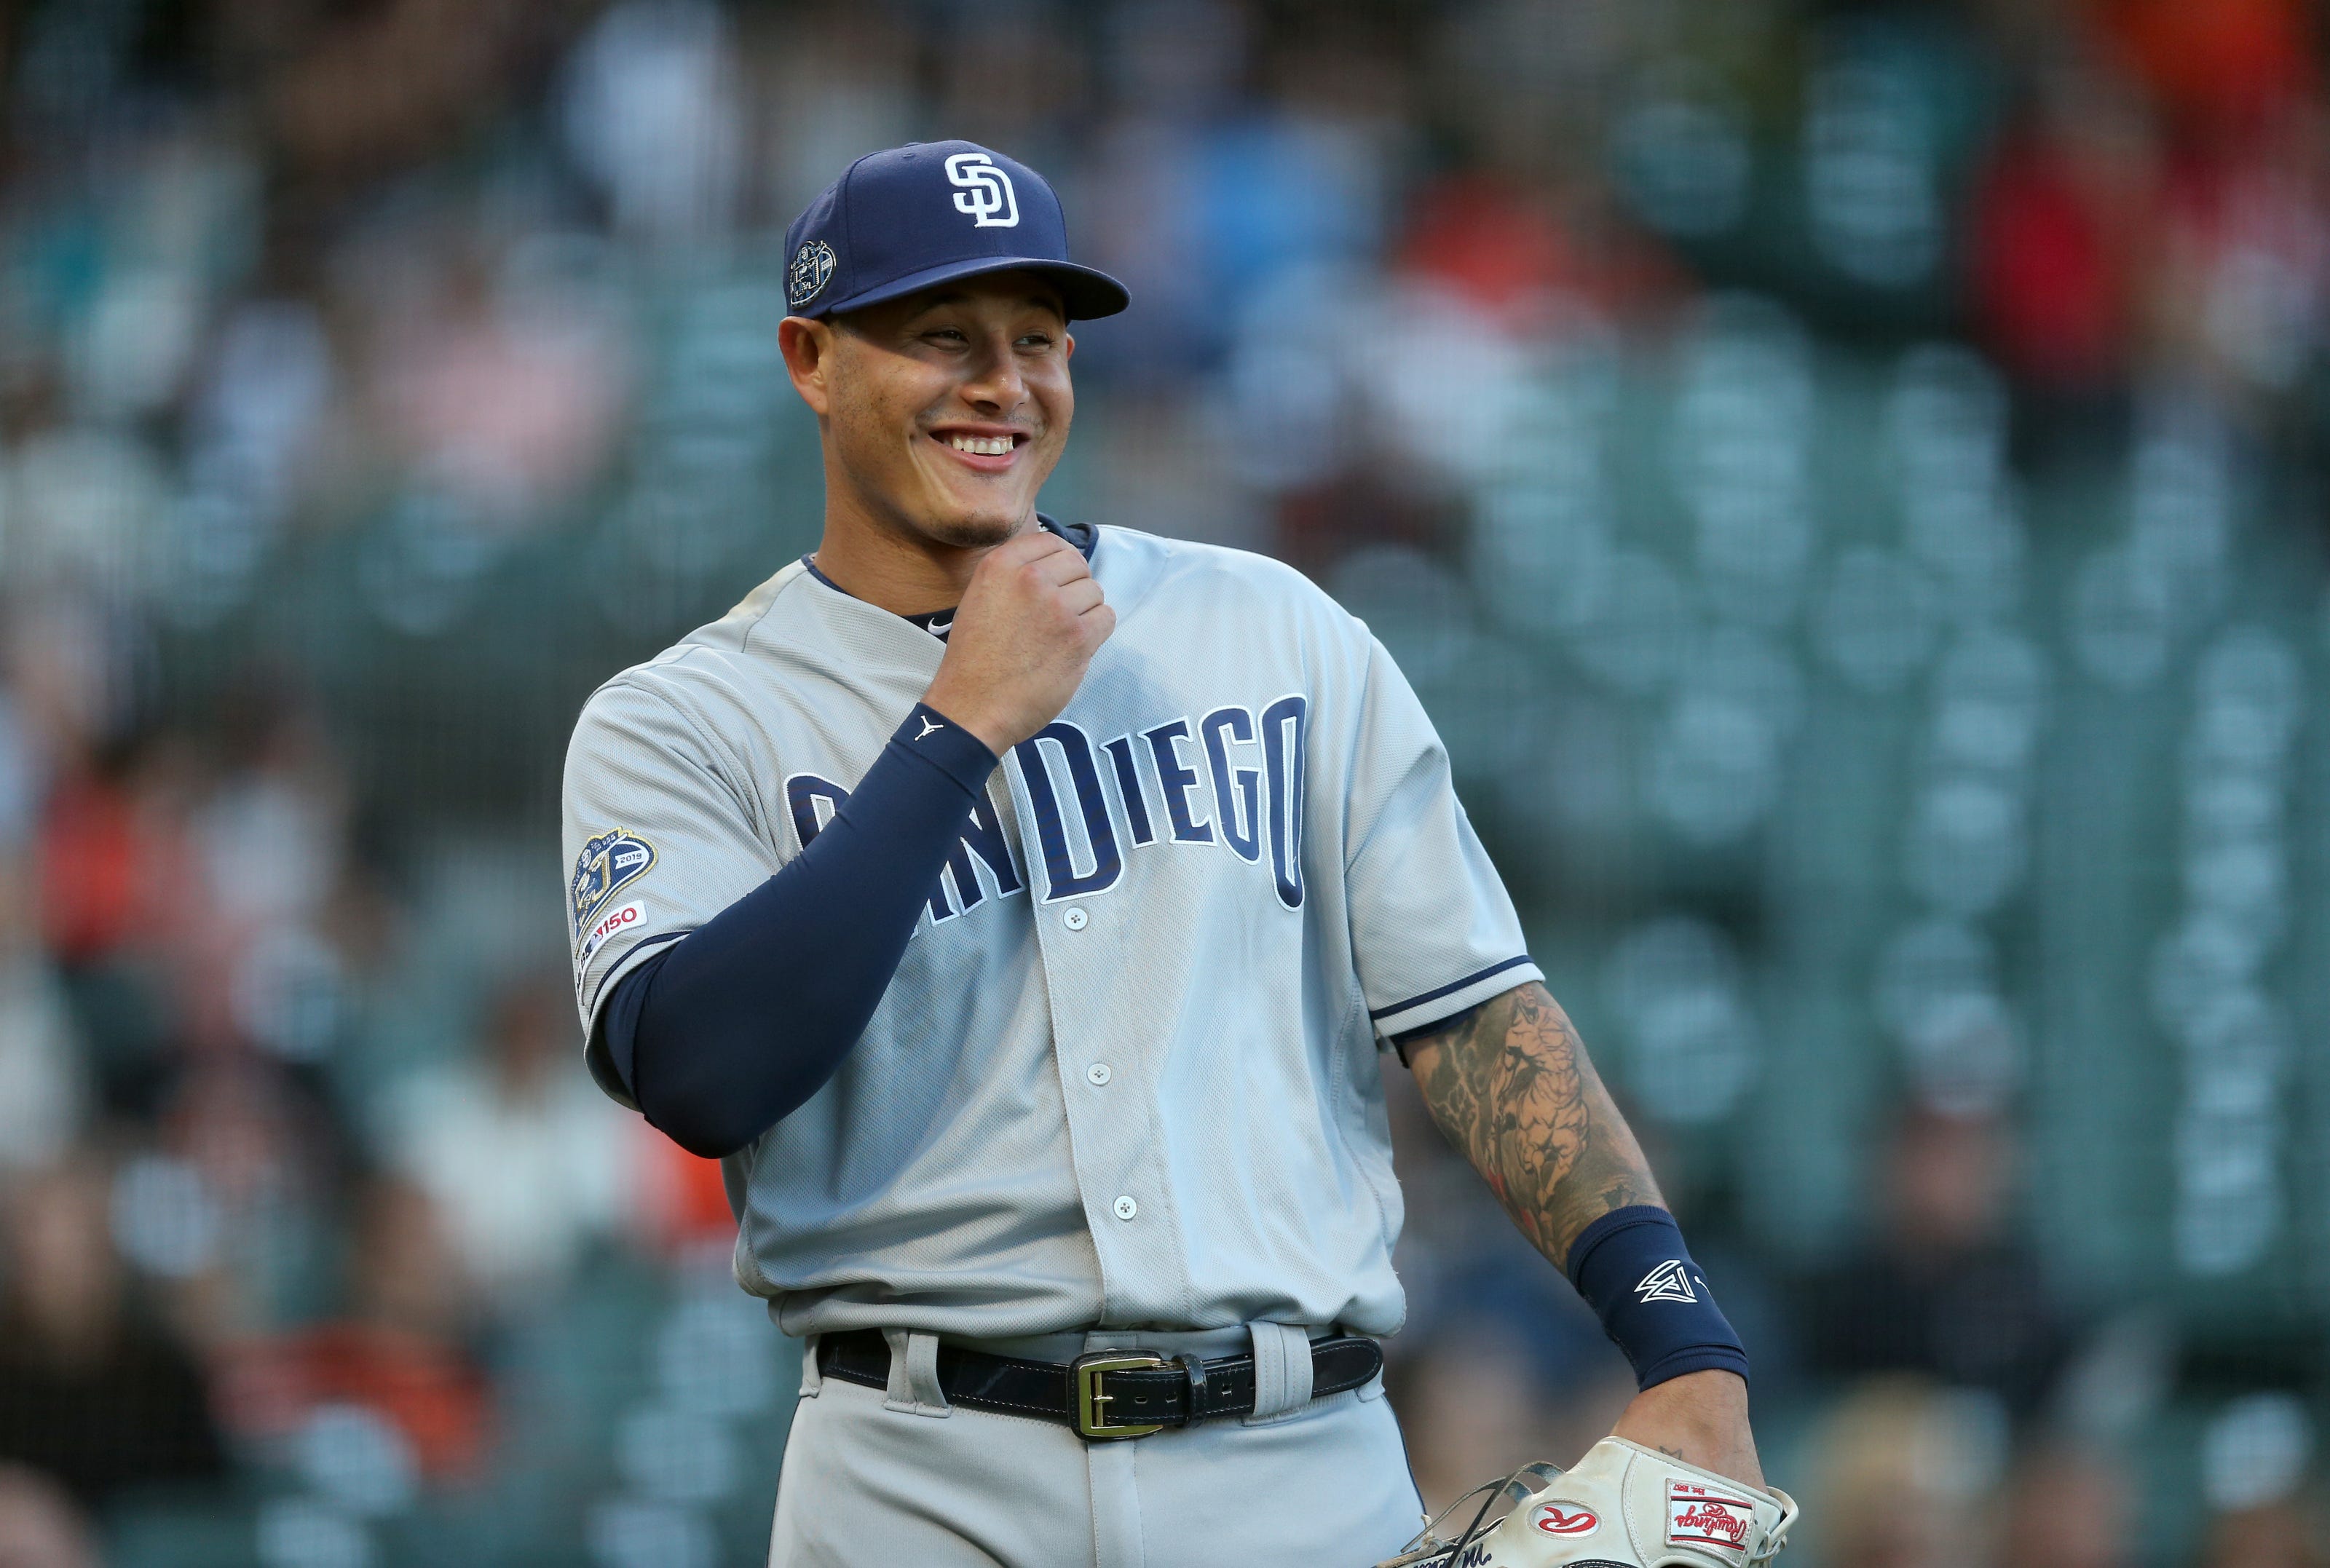 Manny Machado signing with Padres doesn't make them a contender